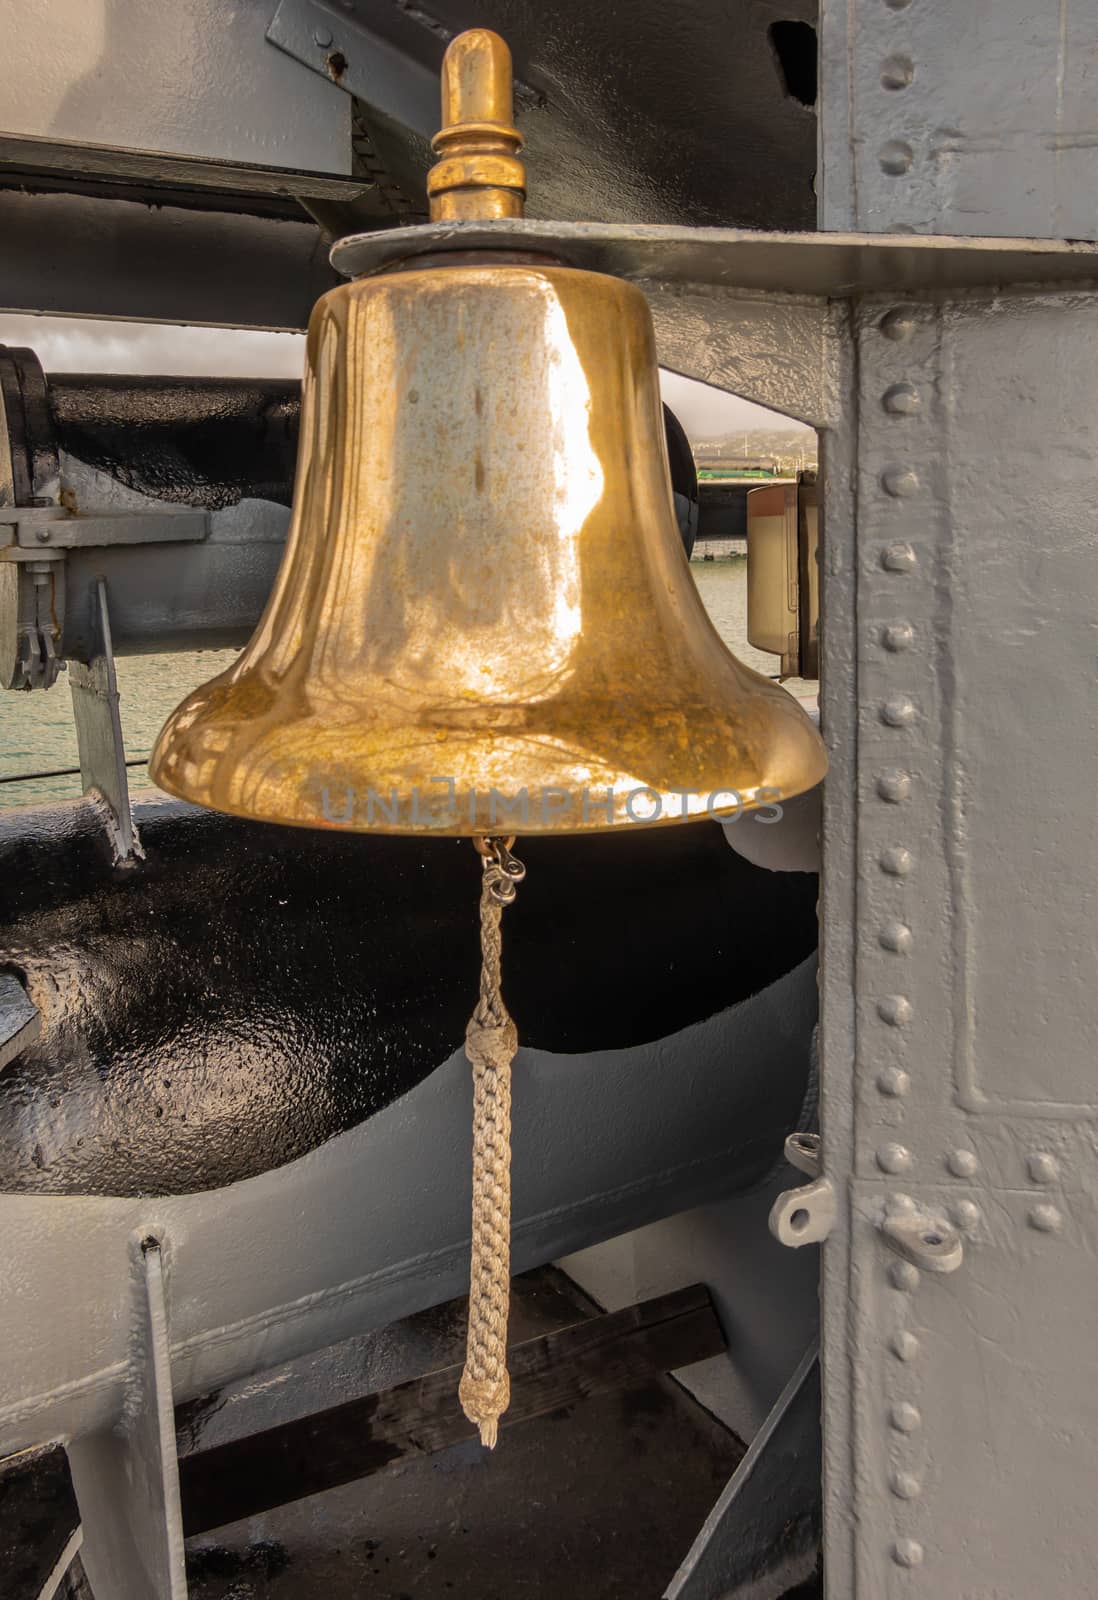 Ship bell of submarine USS Bowfin in Pearl Harbor, Oahu, Hawaii, by Claudine